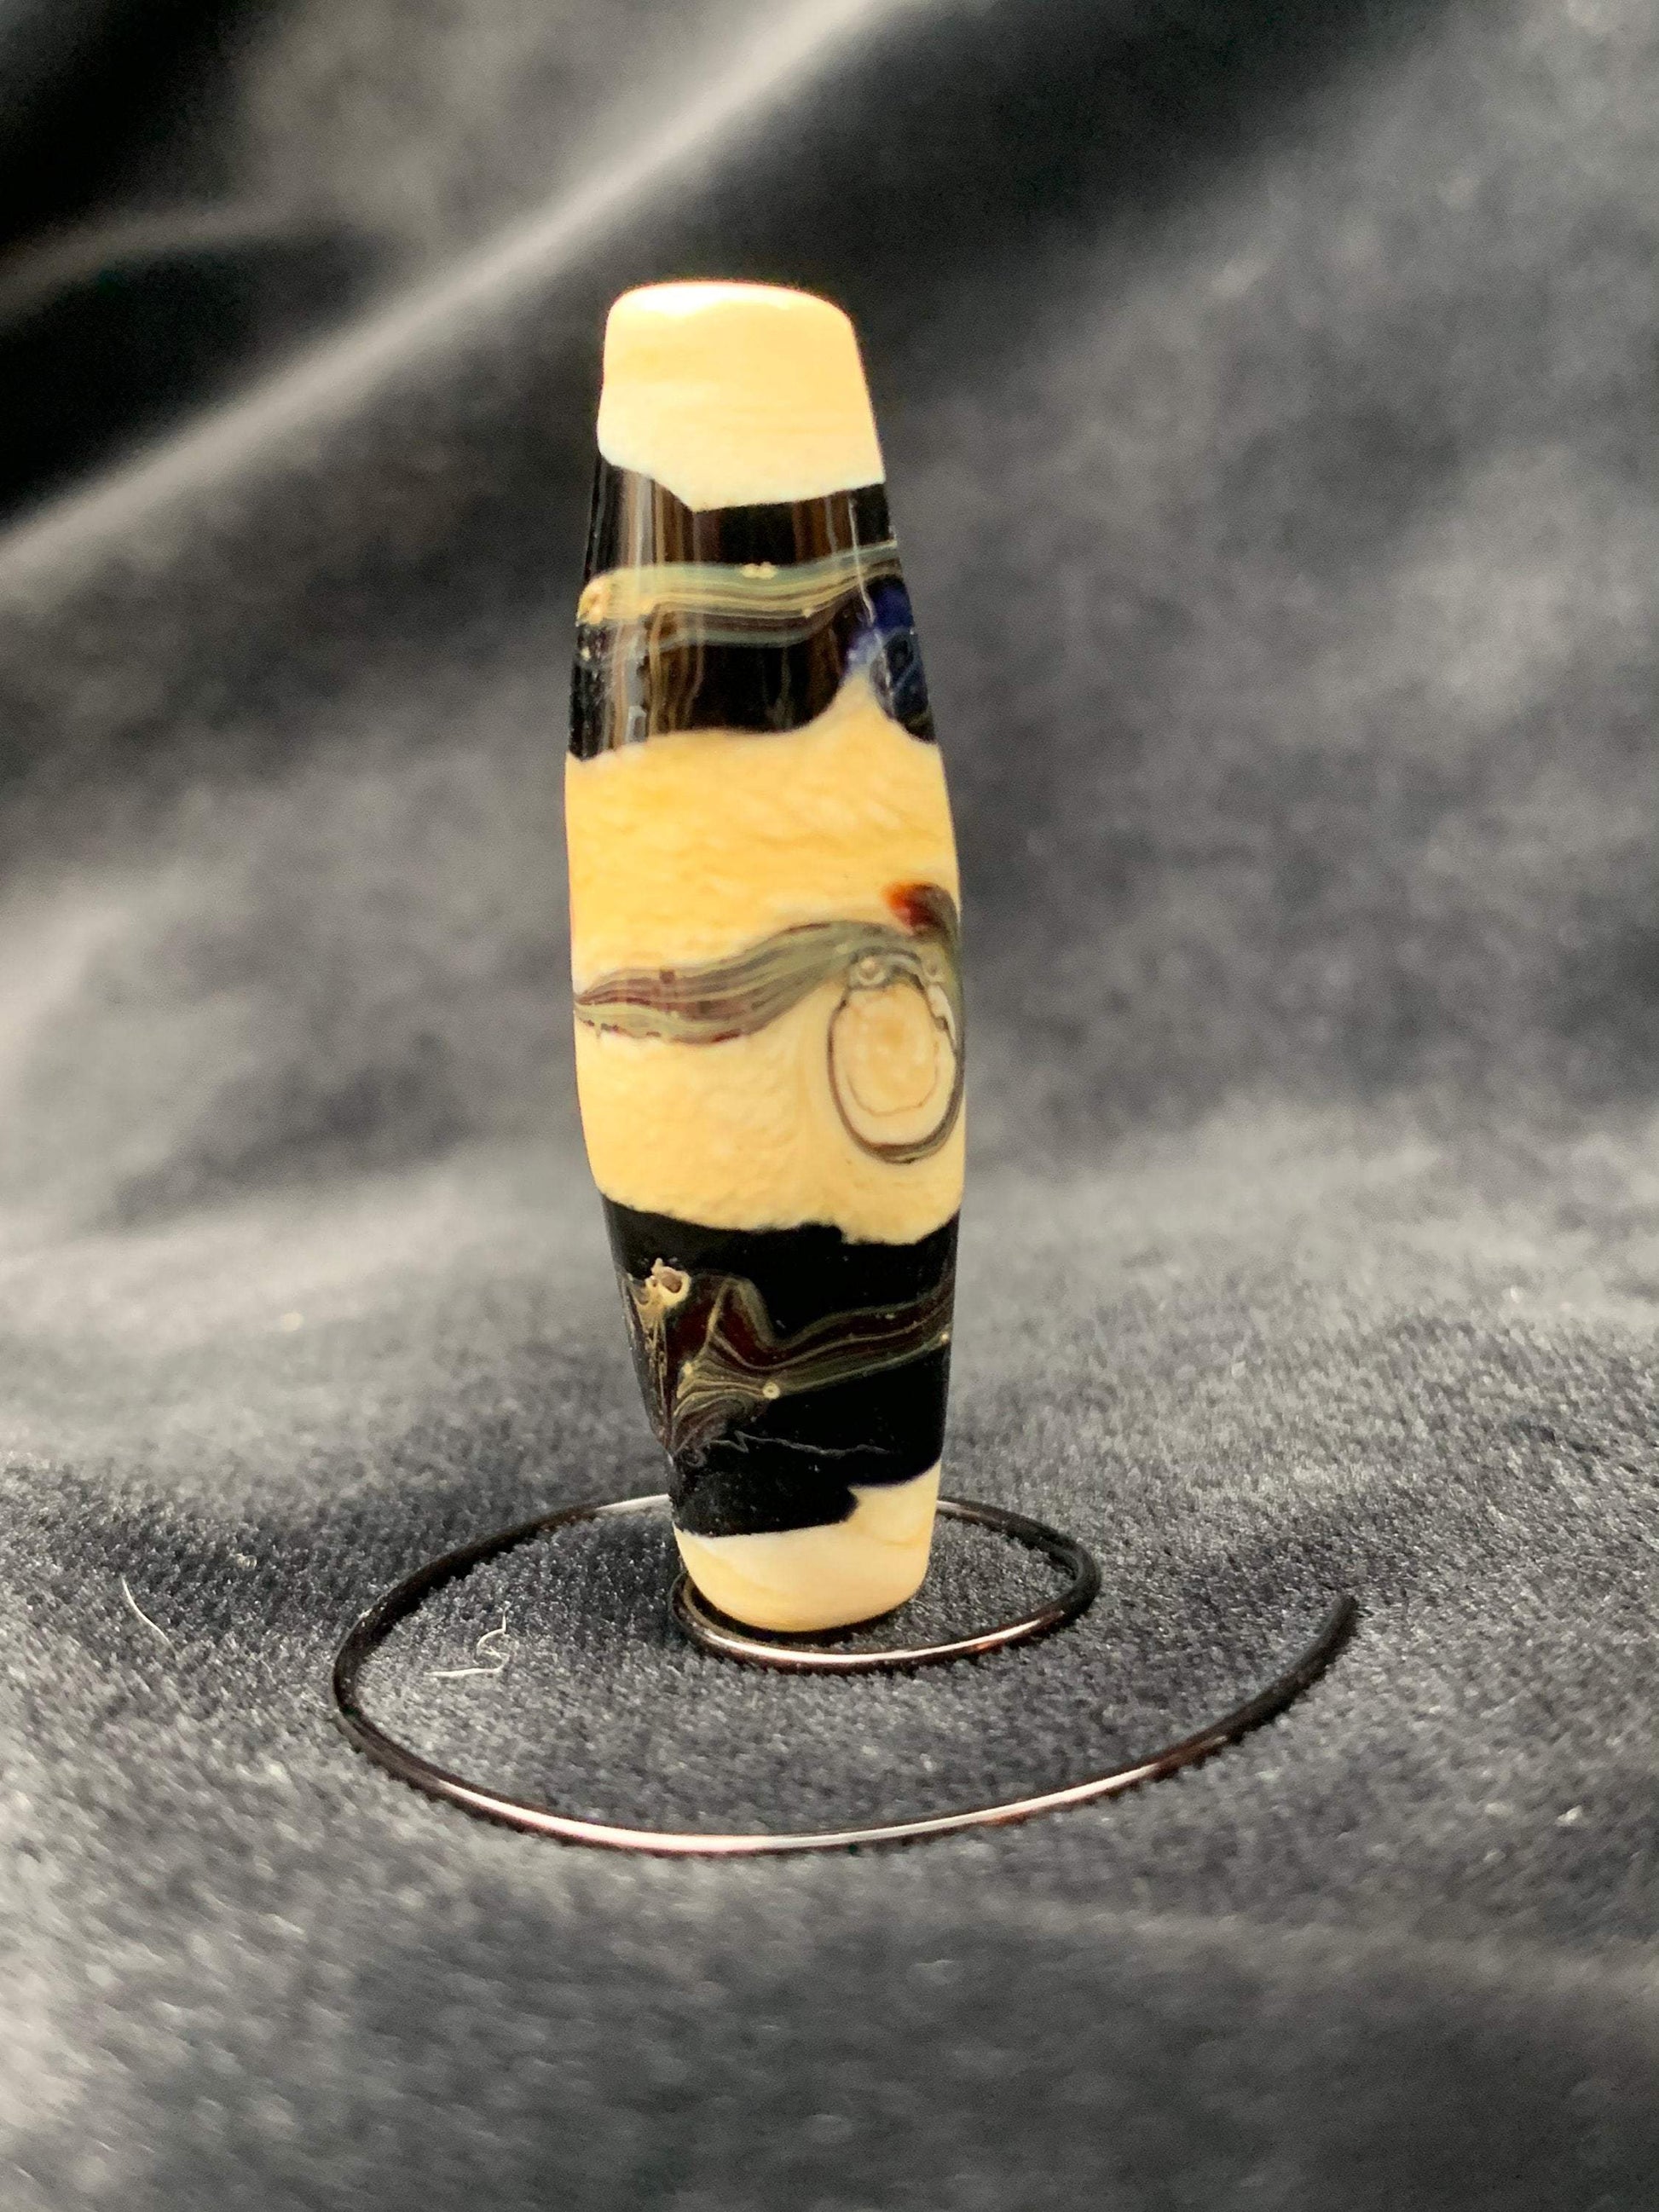 a handmade lampworked glass bead with black stripes and swirls on an ivory background